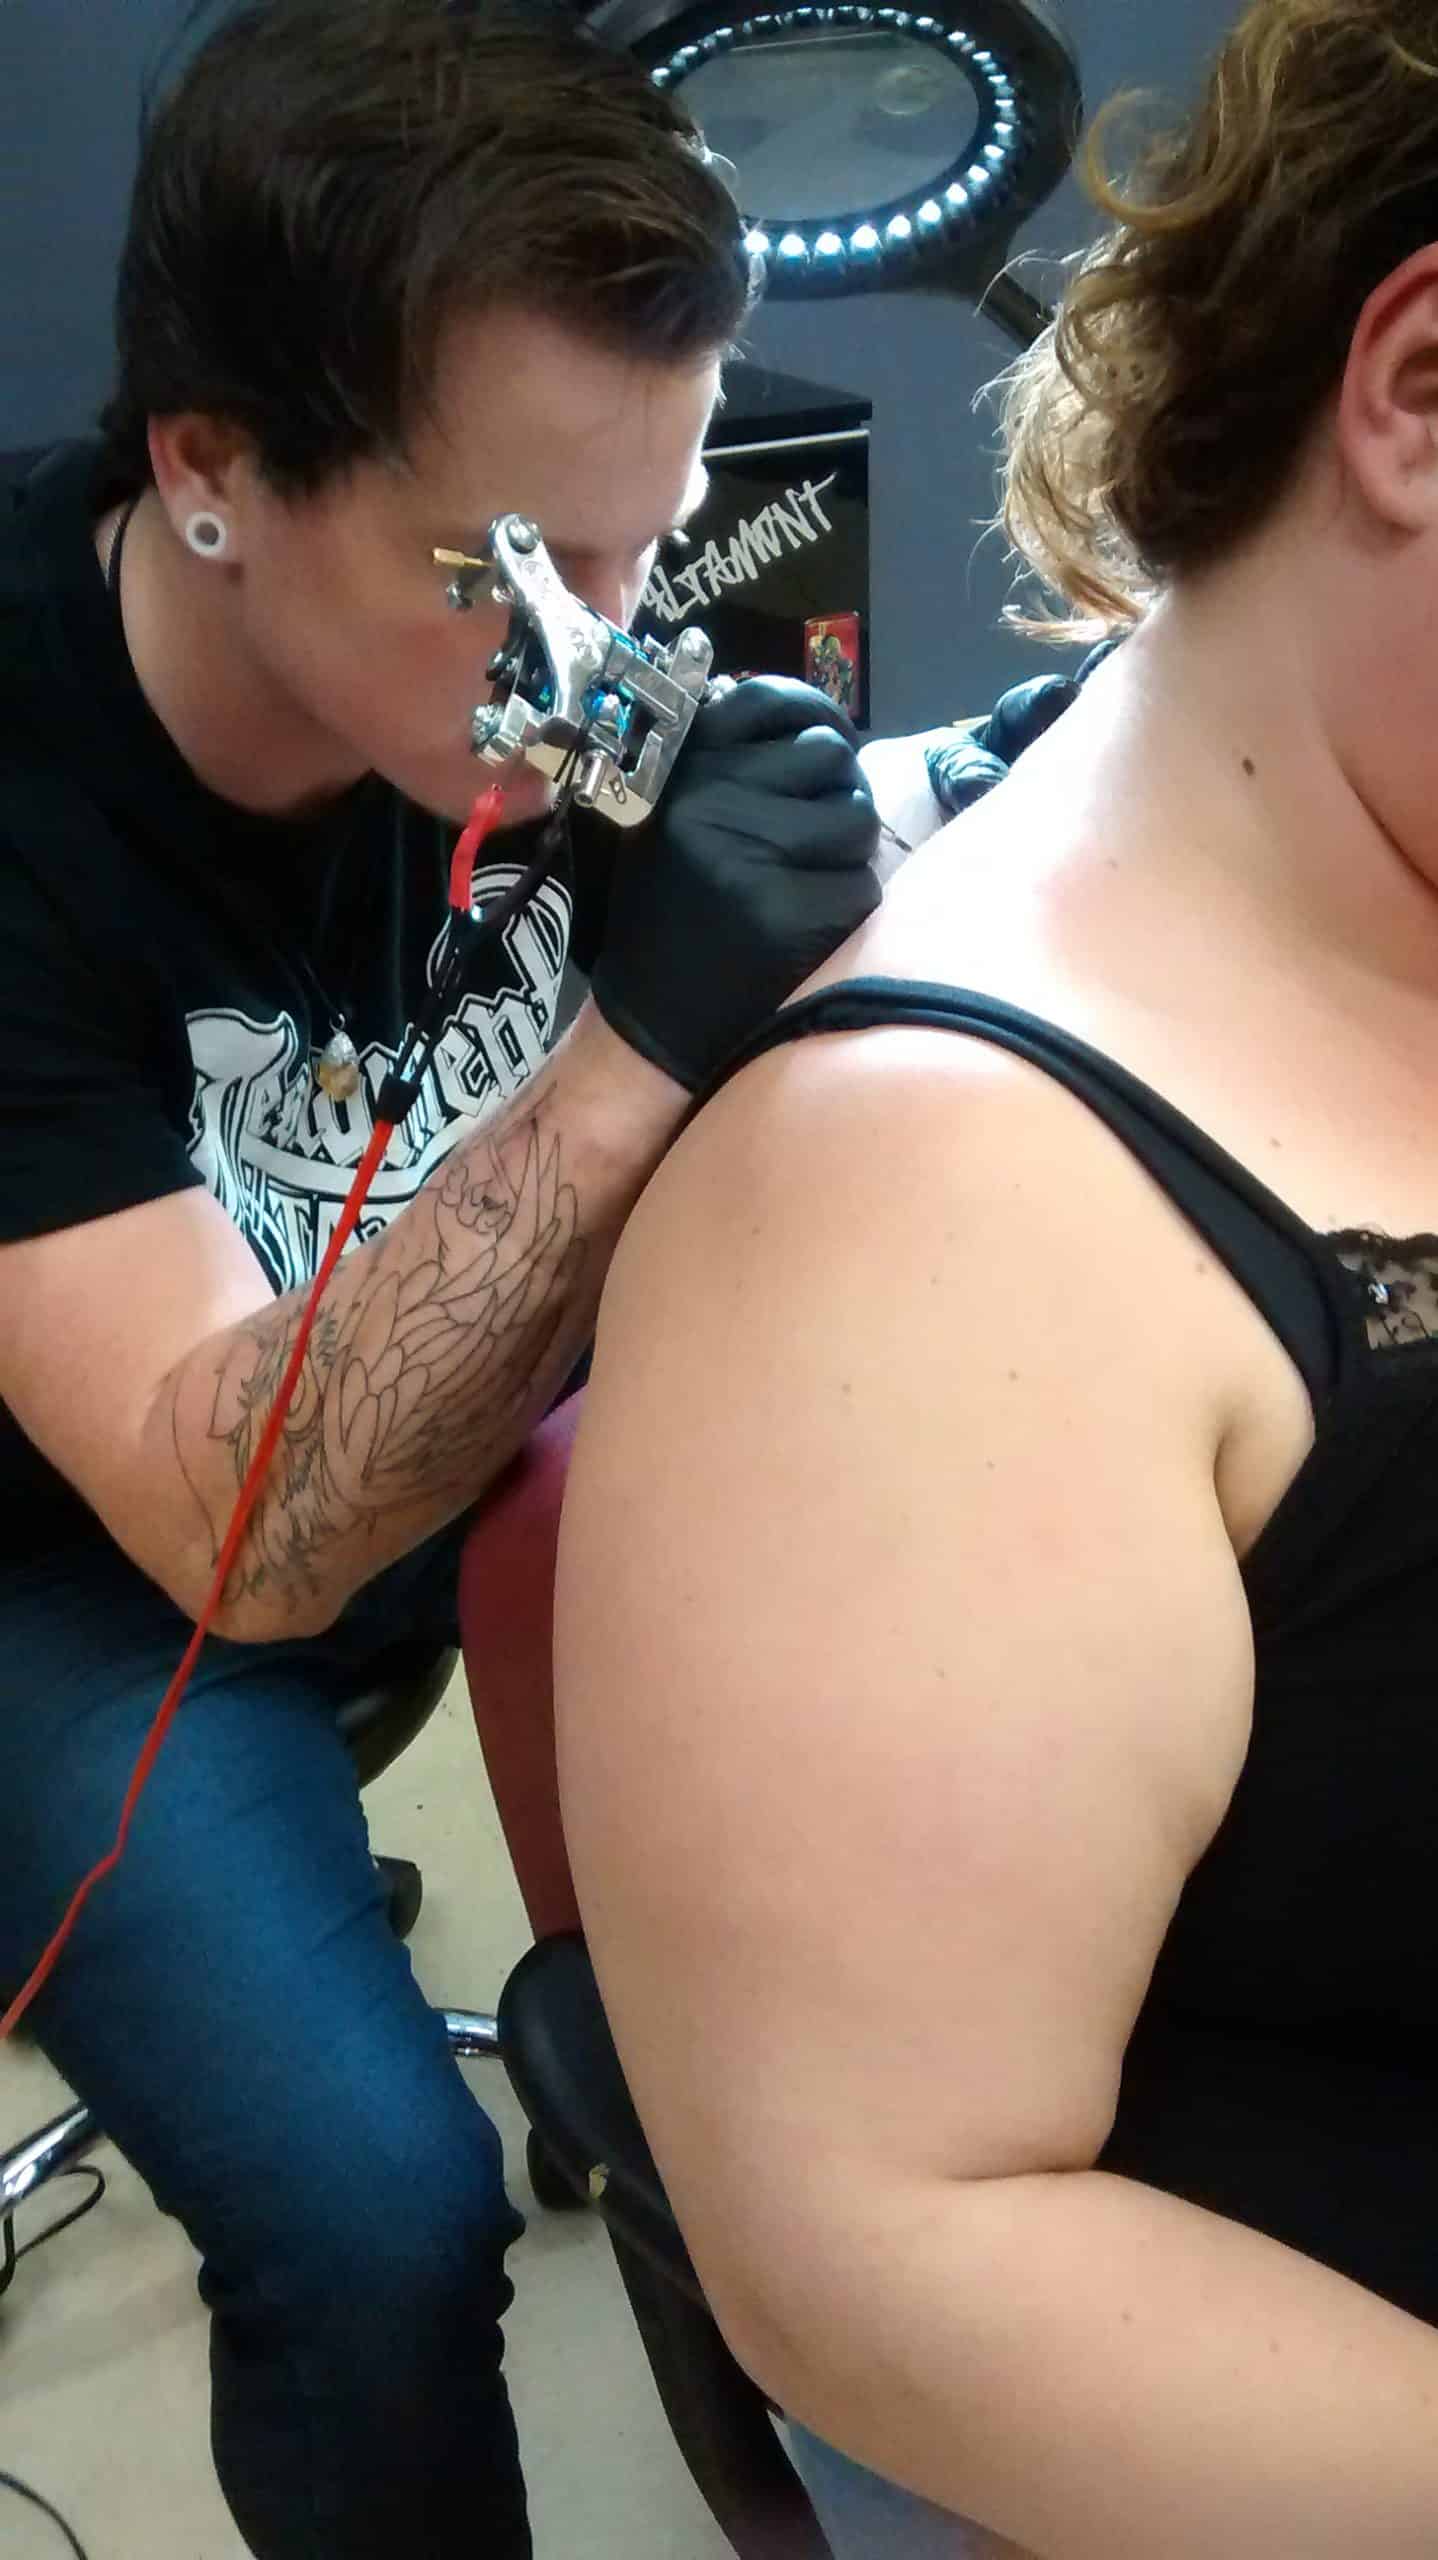 The guy who just did her neck tattoo looks like an unprofessional artist!  Why would she get it on her neck!!! Smoking inside the tattoo shop!?? I'd  never go to him and